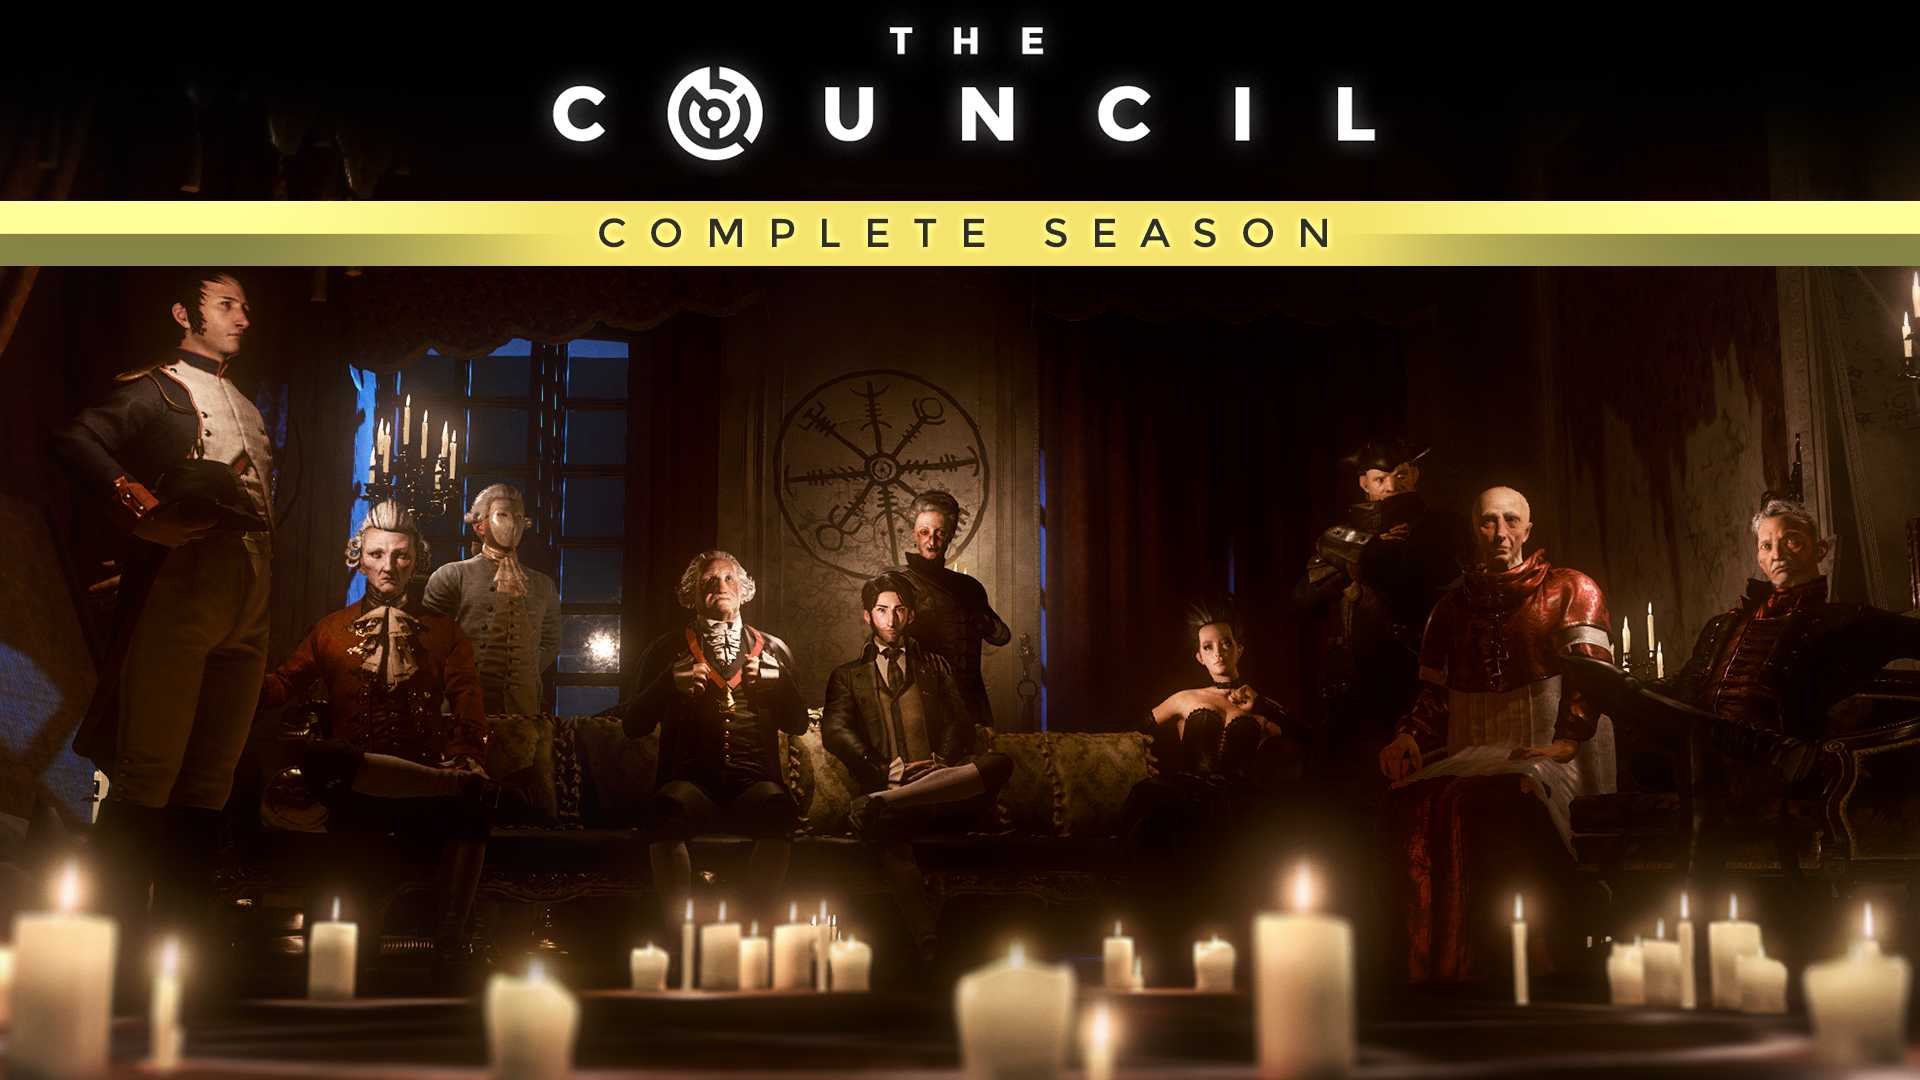 The Council - Complete Season XBOX ONE / SERIES X|S ?